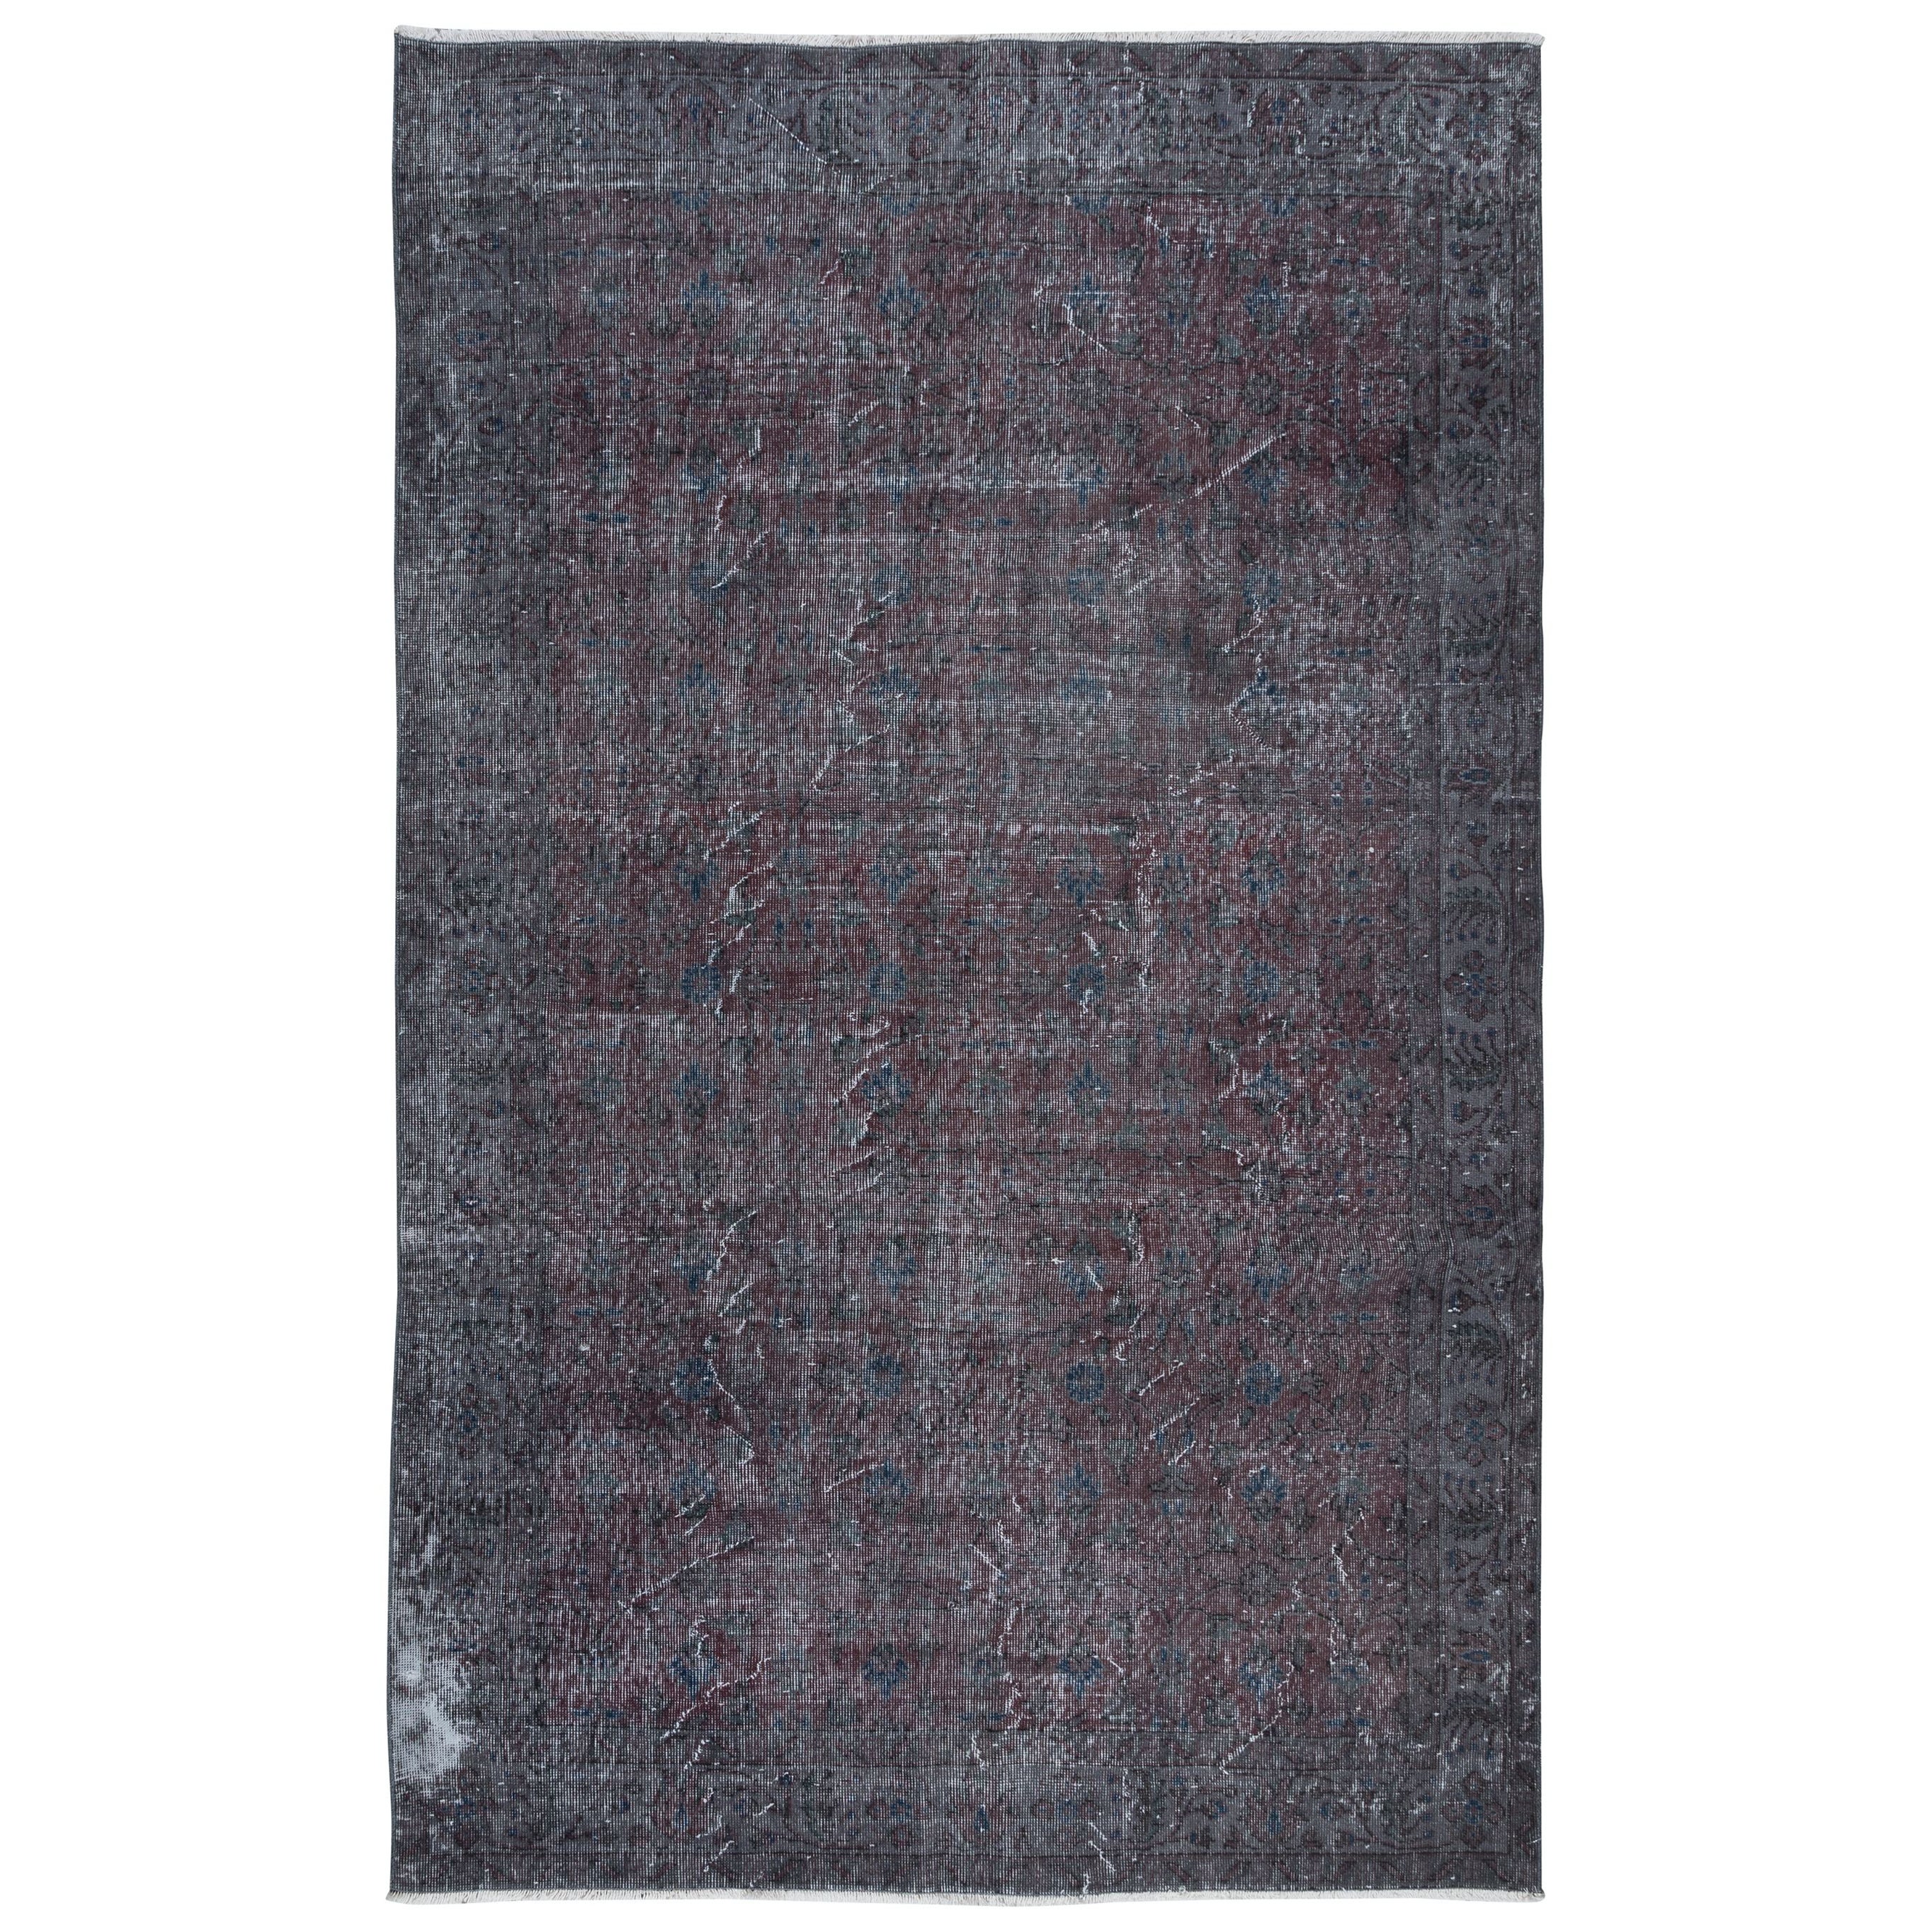 6x9.3 Ft Distressed Handmade Rug in Gray & Faded Red, Ideal for Modern Interiors For Sale